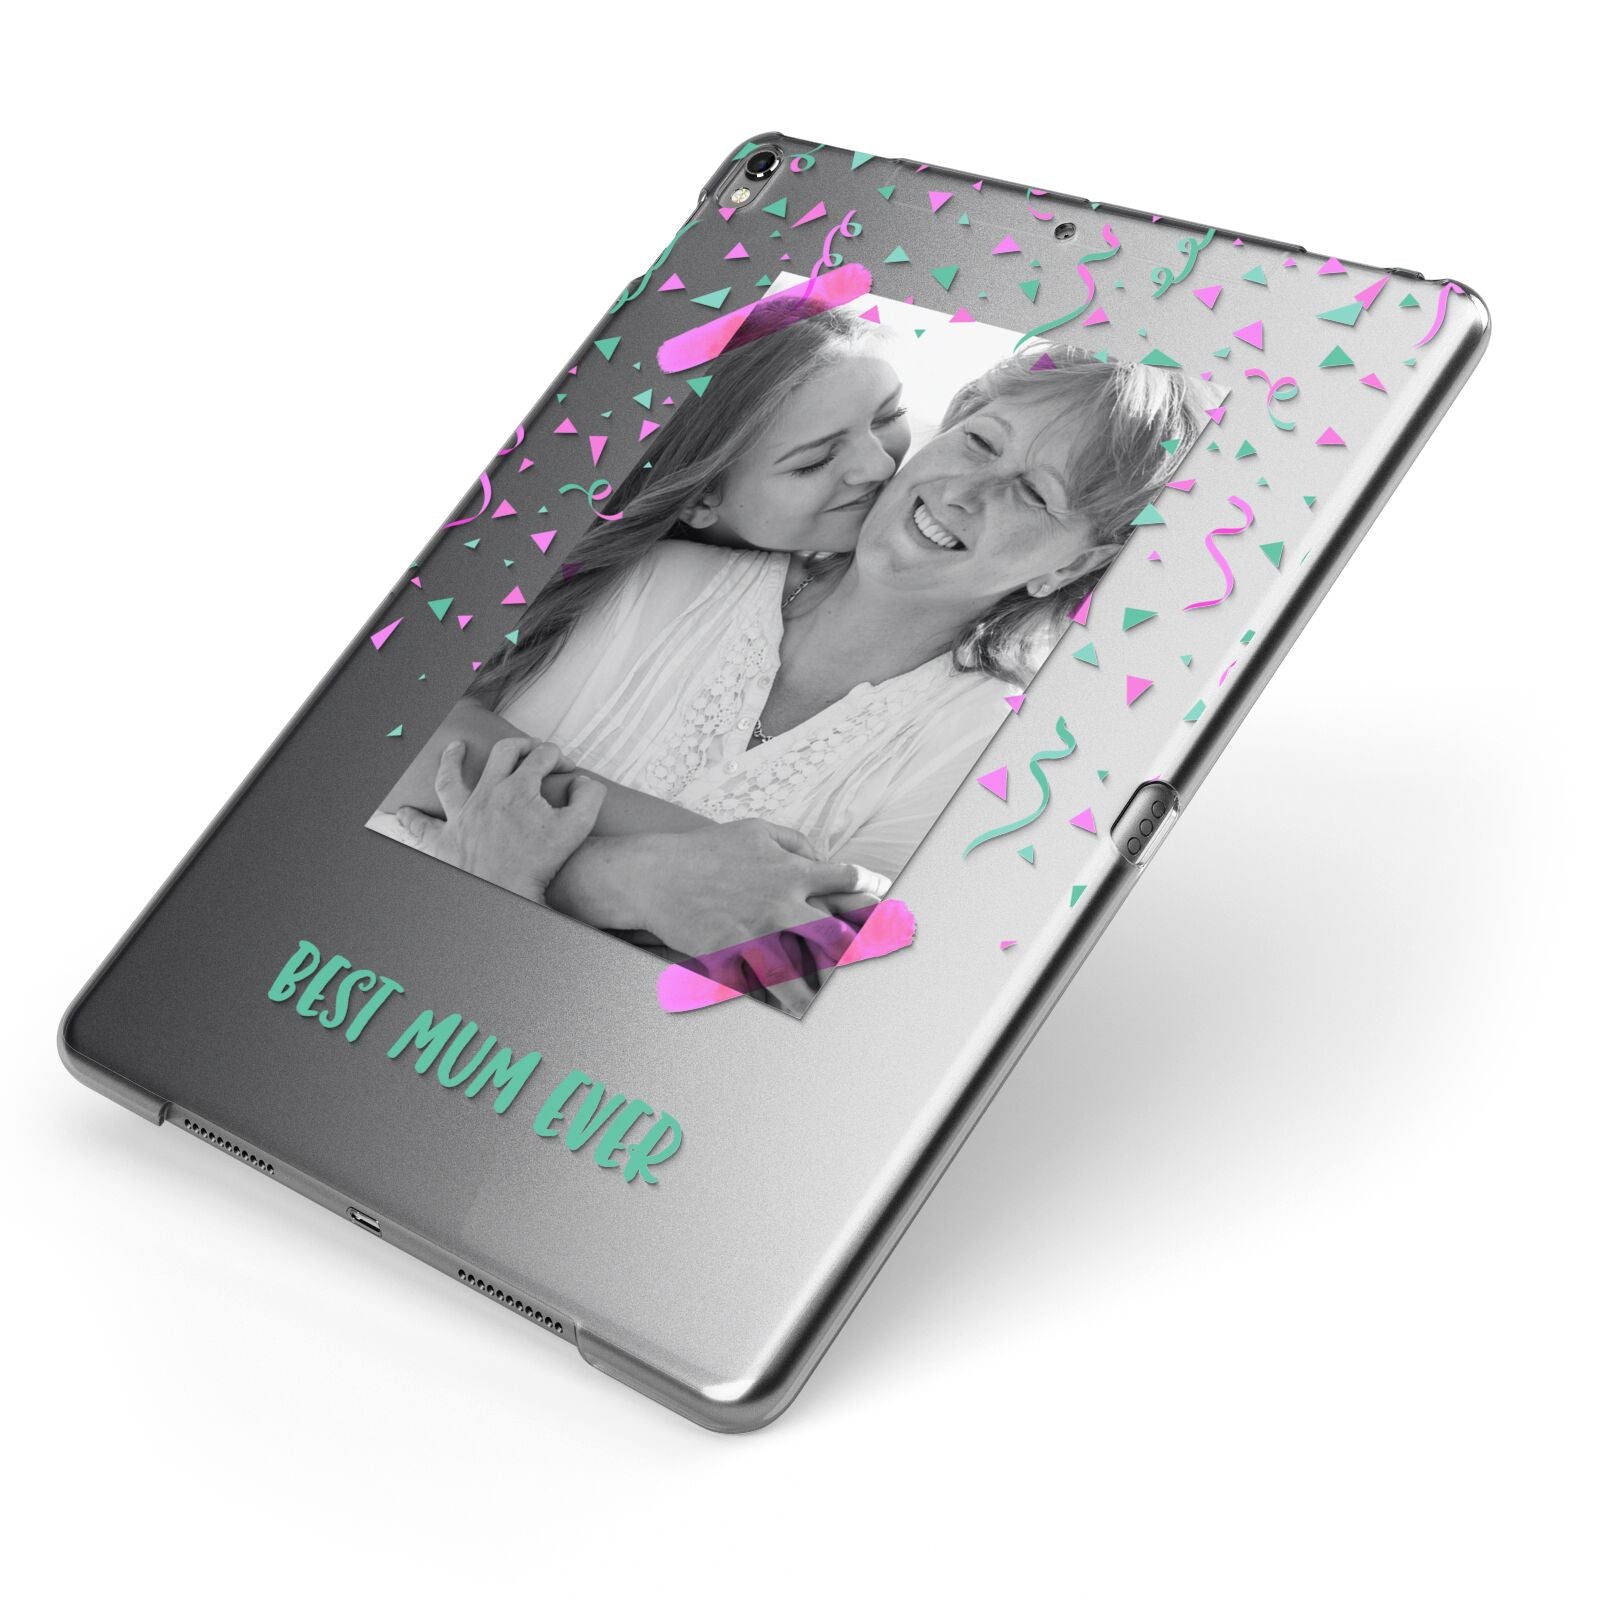 Best Mum Photo Upload Mothers Day Apple iPad Case on Grey iPad Side View